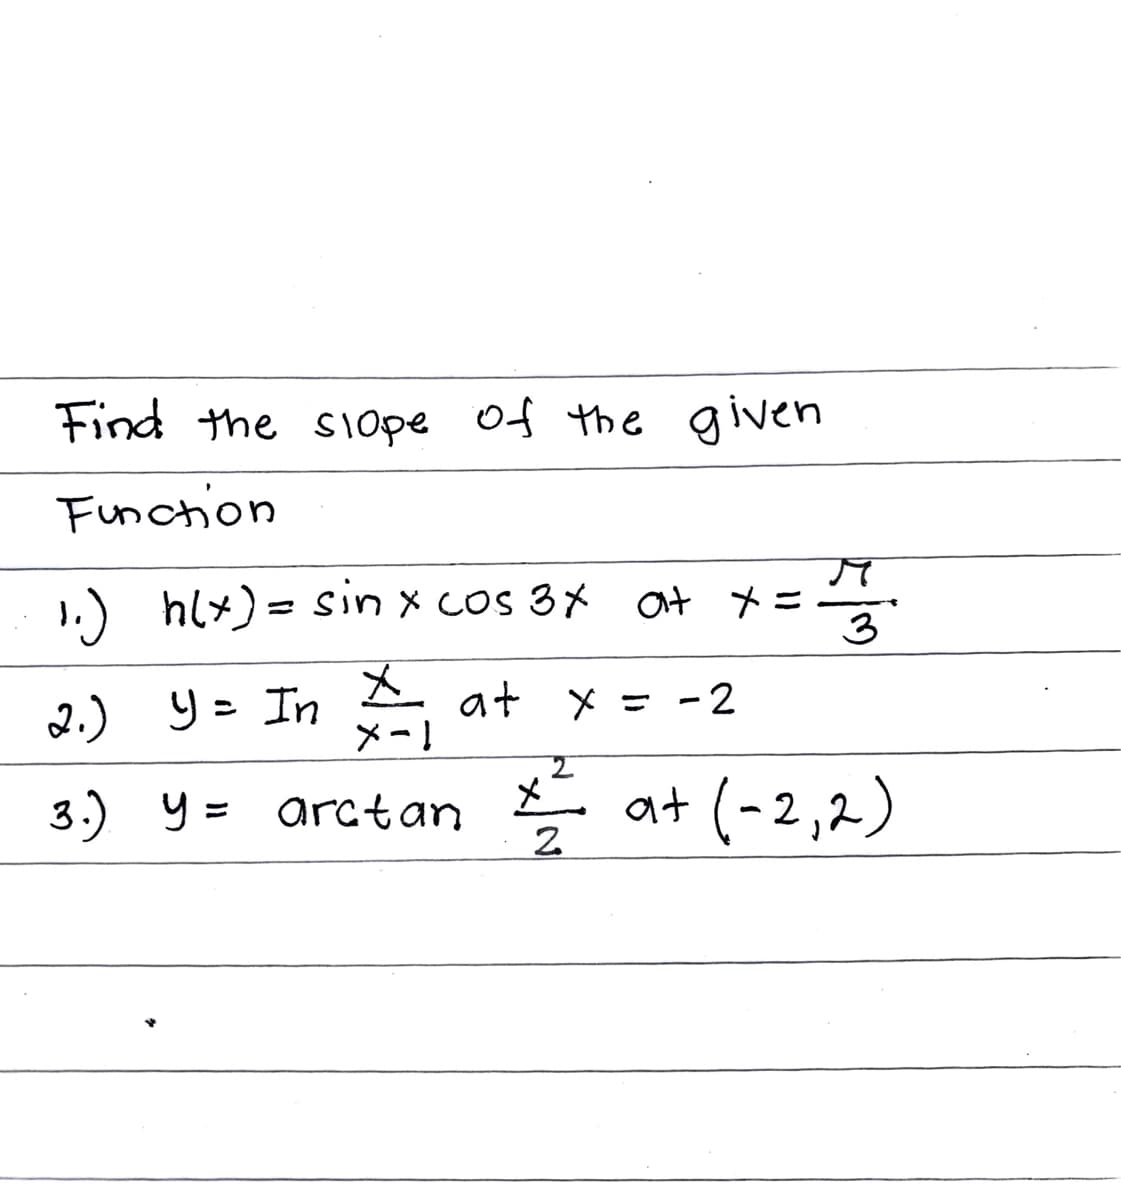 Find the sIOpe of the given
Function
1) hly)= sin x cos 3メ at メ=
3
メ
2.) y = In
メー!
乙- ニメ +D
3.) y =
メニ at (-2,2)
arctan
